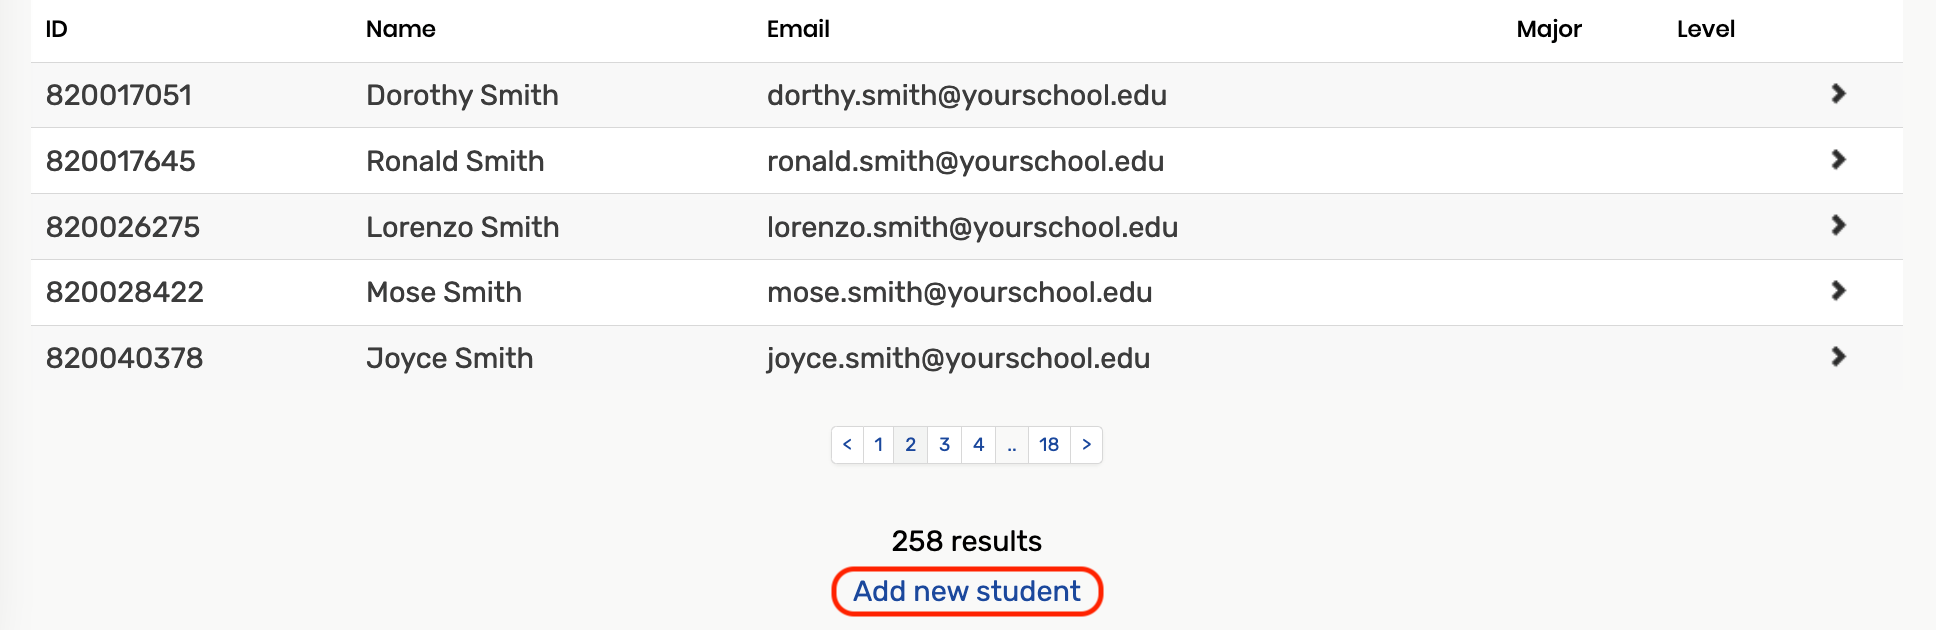 Add new student link